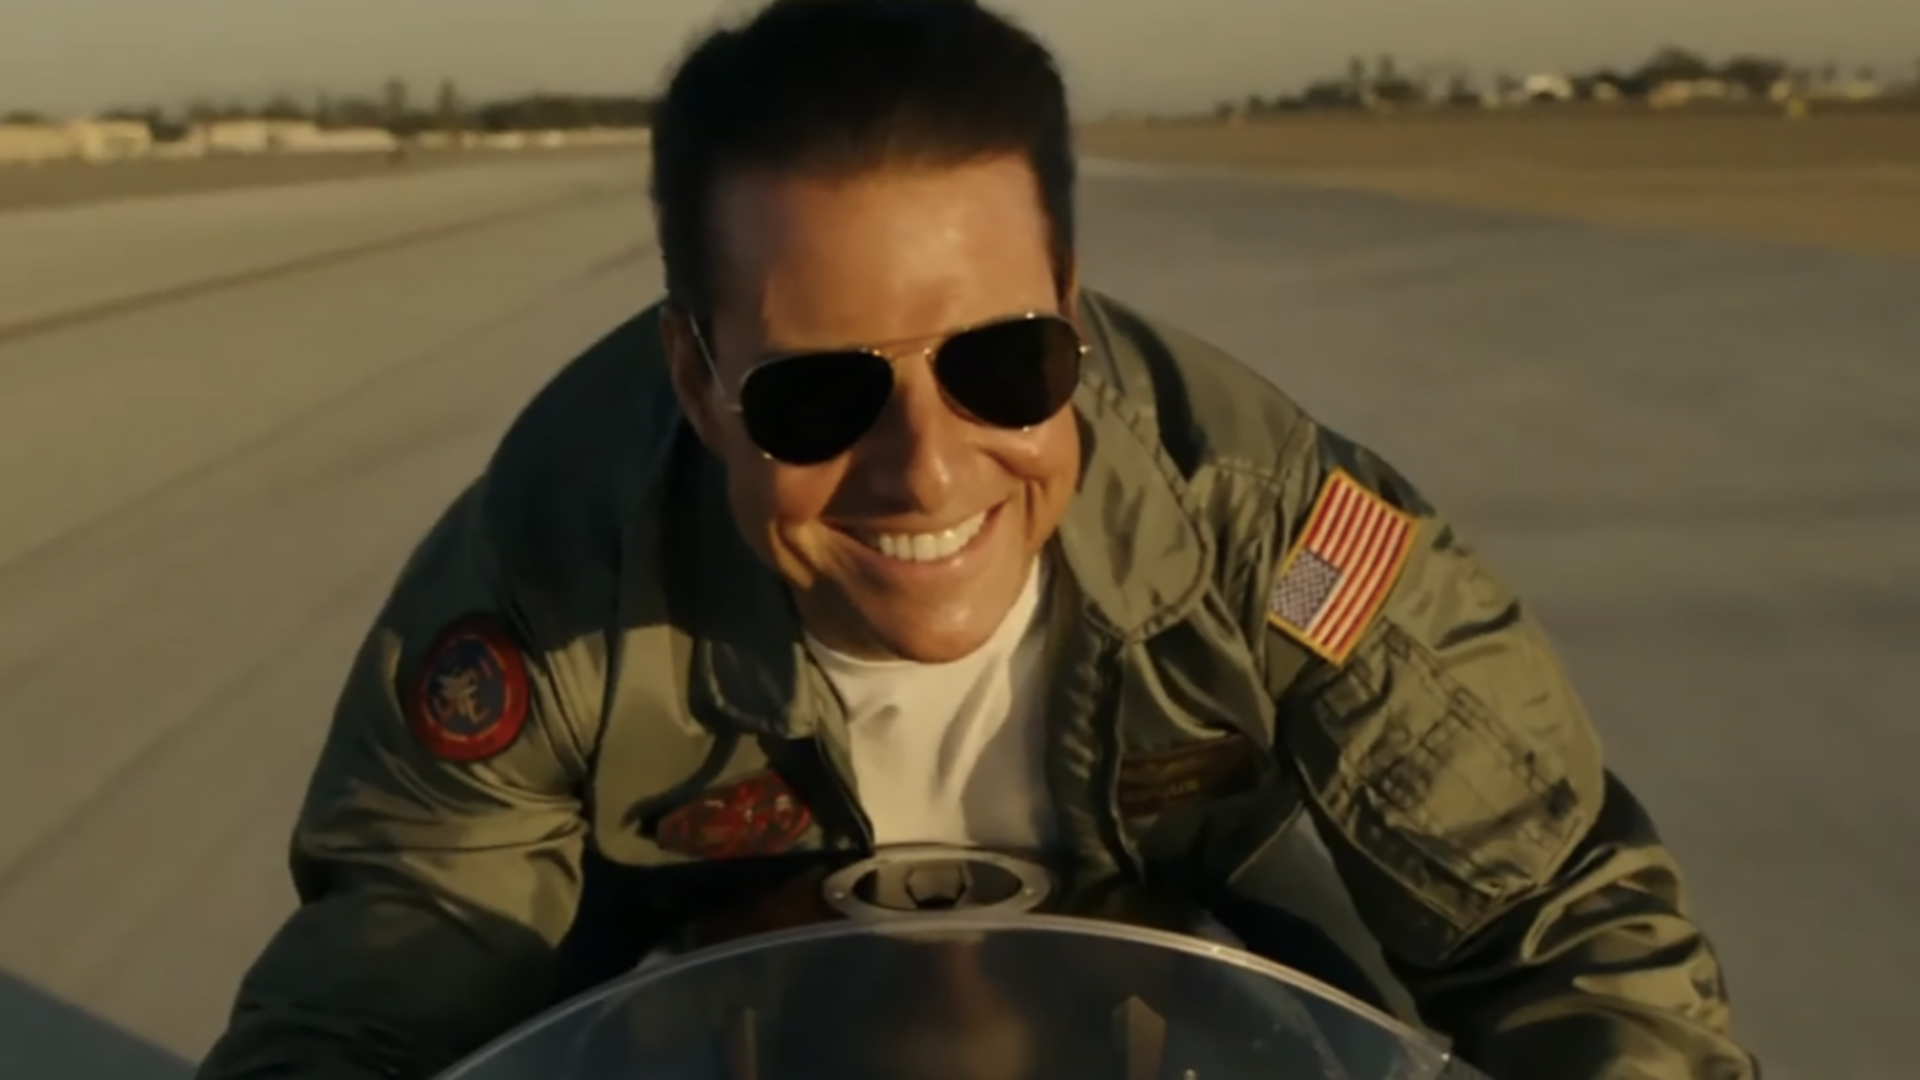 Top Gun: Maverick is the most successful US military movie ever